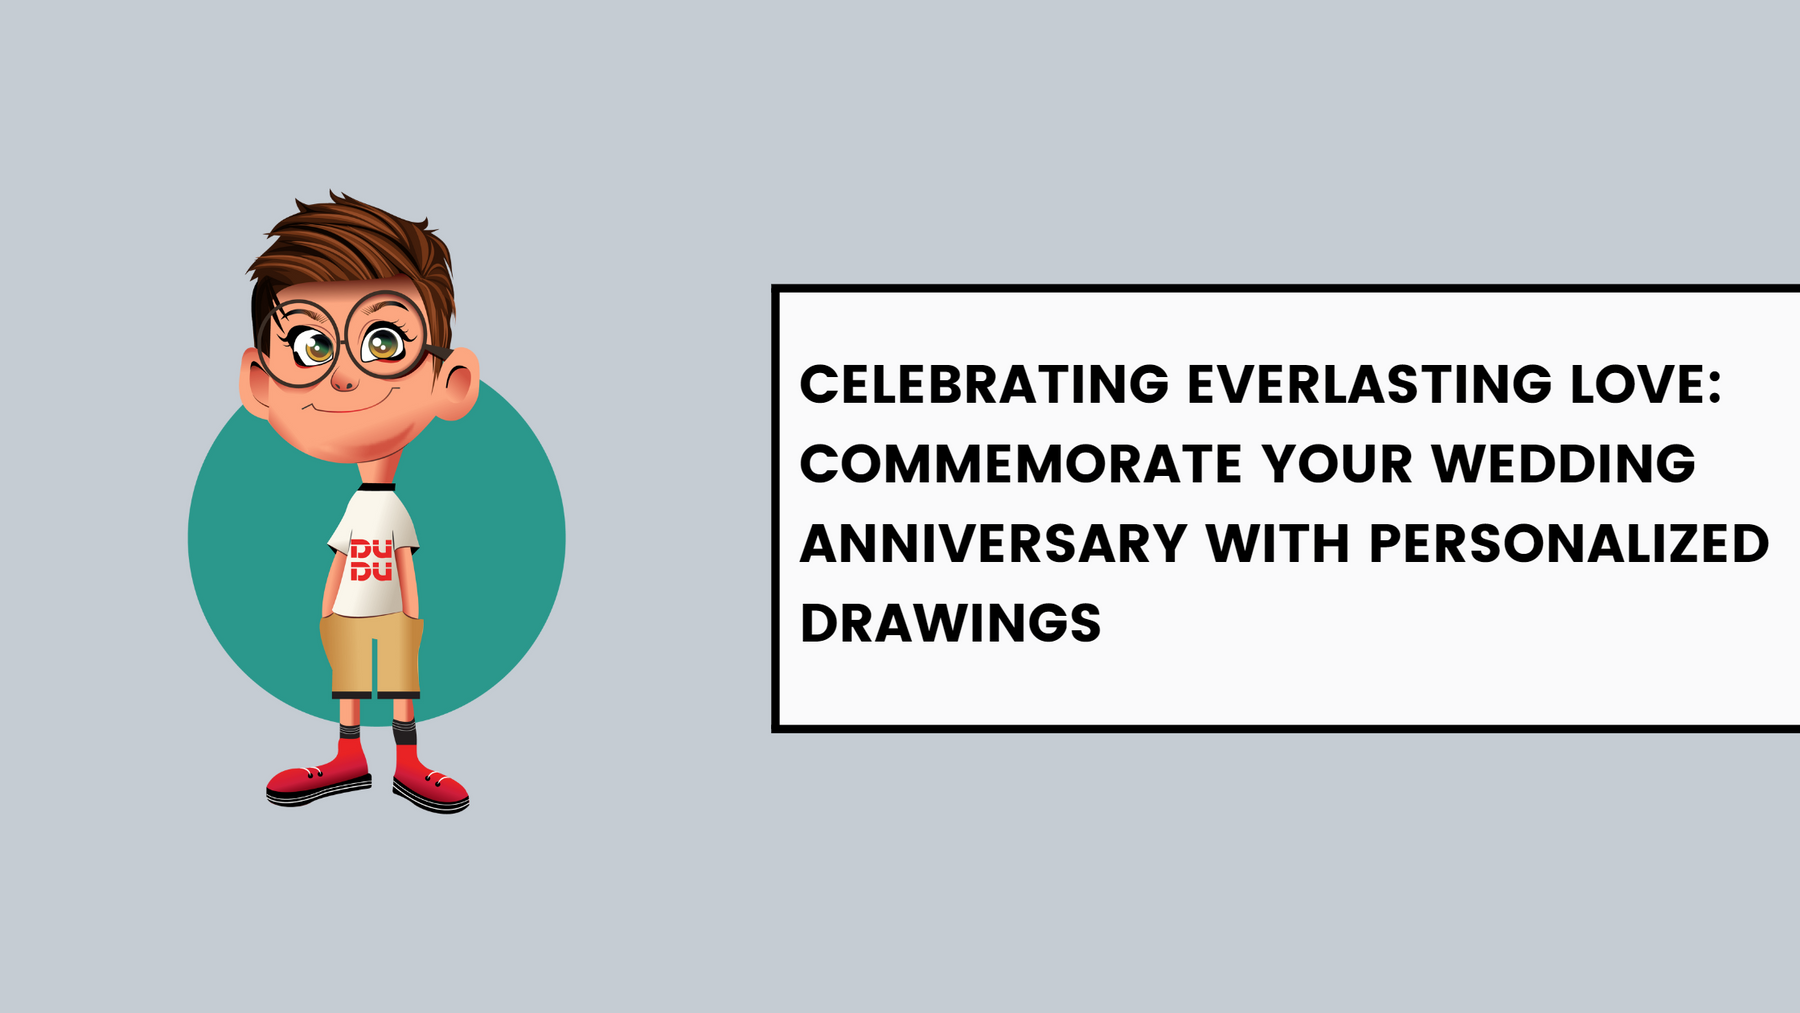 Celebrating Everlasting Love: Commemorate Your Wedding Anniversary with Personalized Drawings